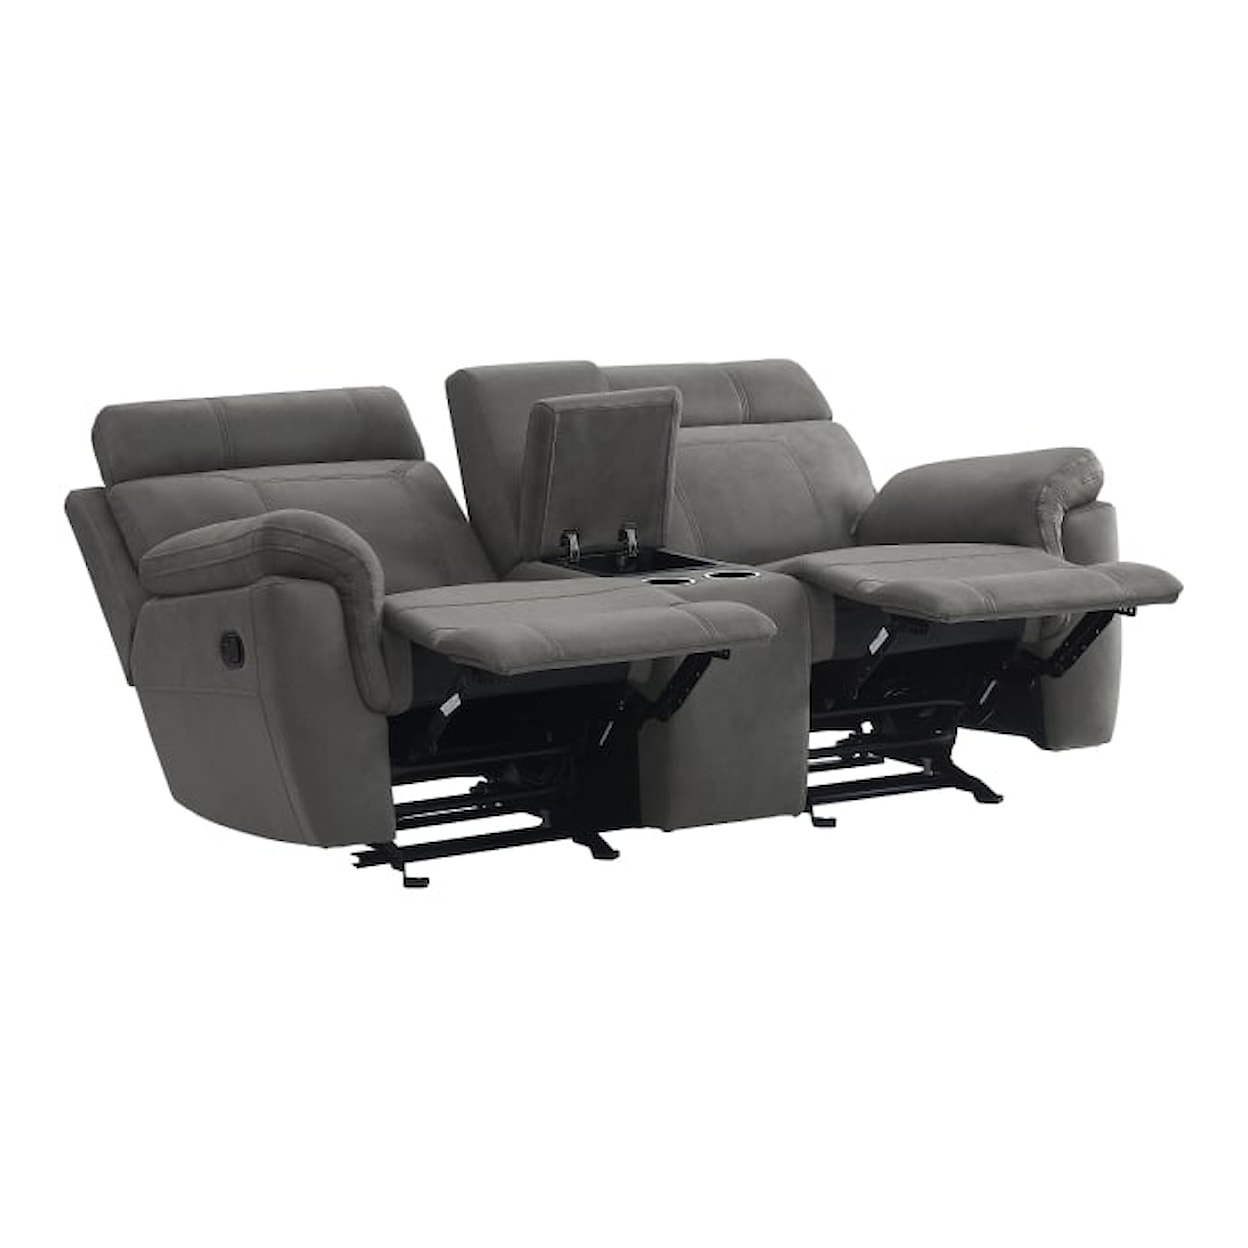 Homelegance Furniture Clifton Double Glider Reclining Loveseat